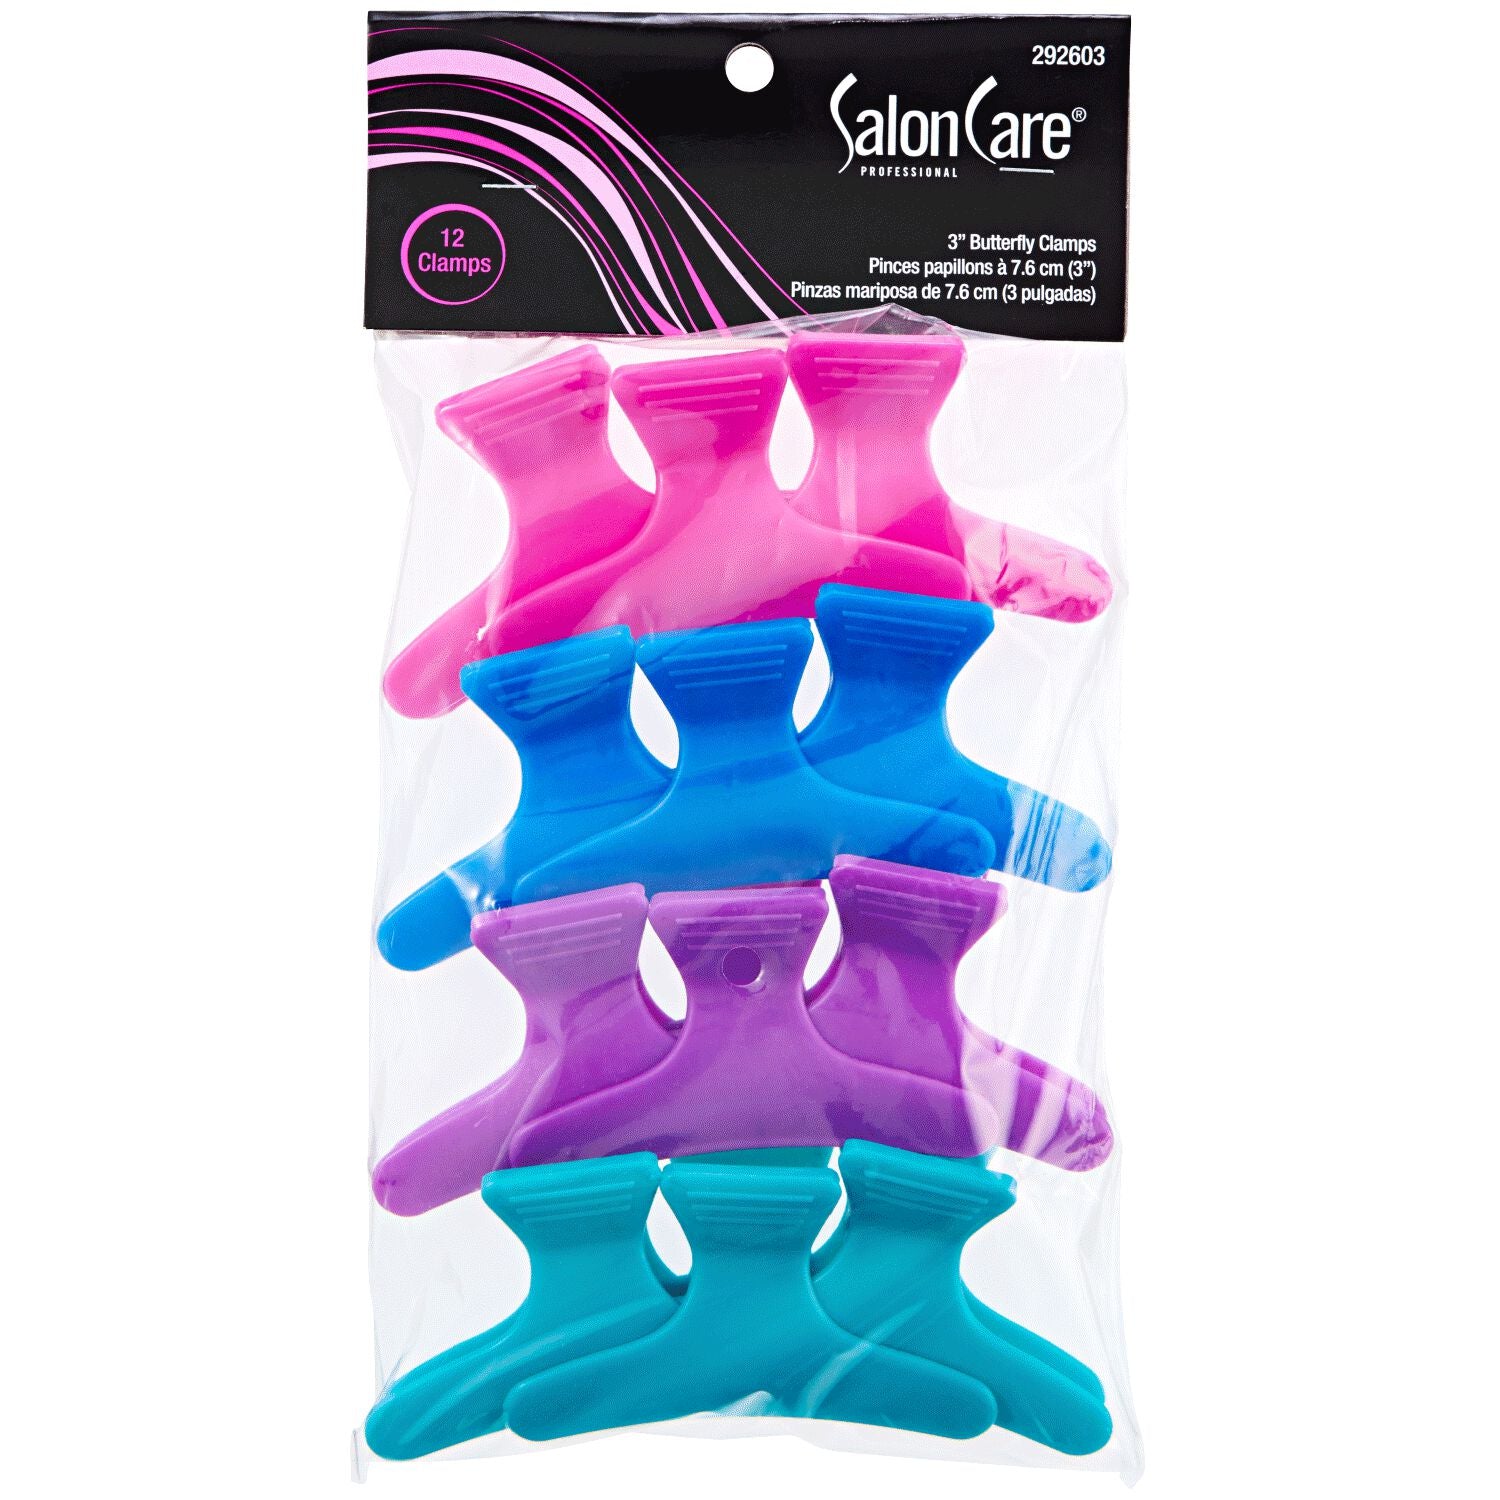 Salon Care 3 Inch Butterfly Clamps